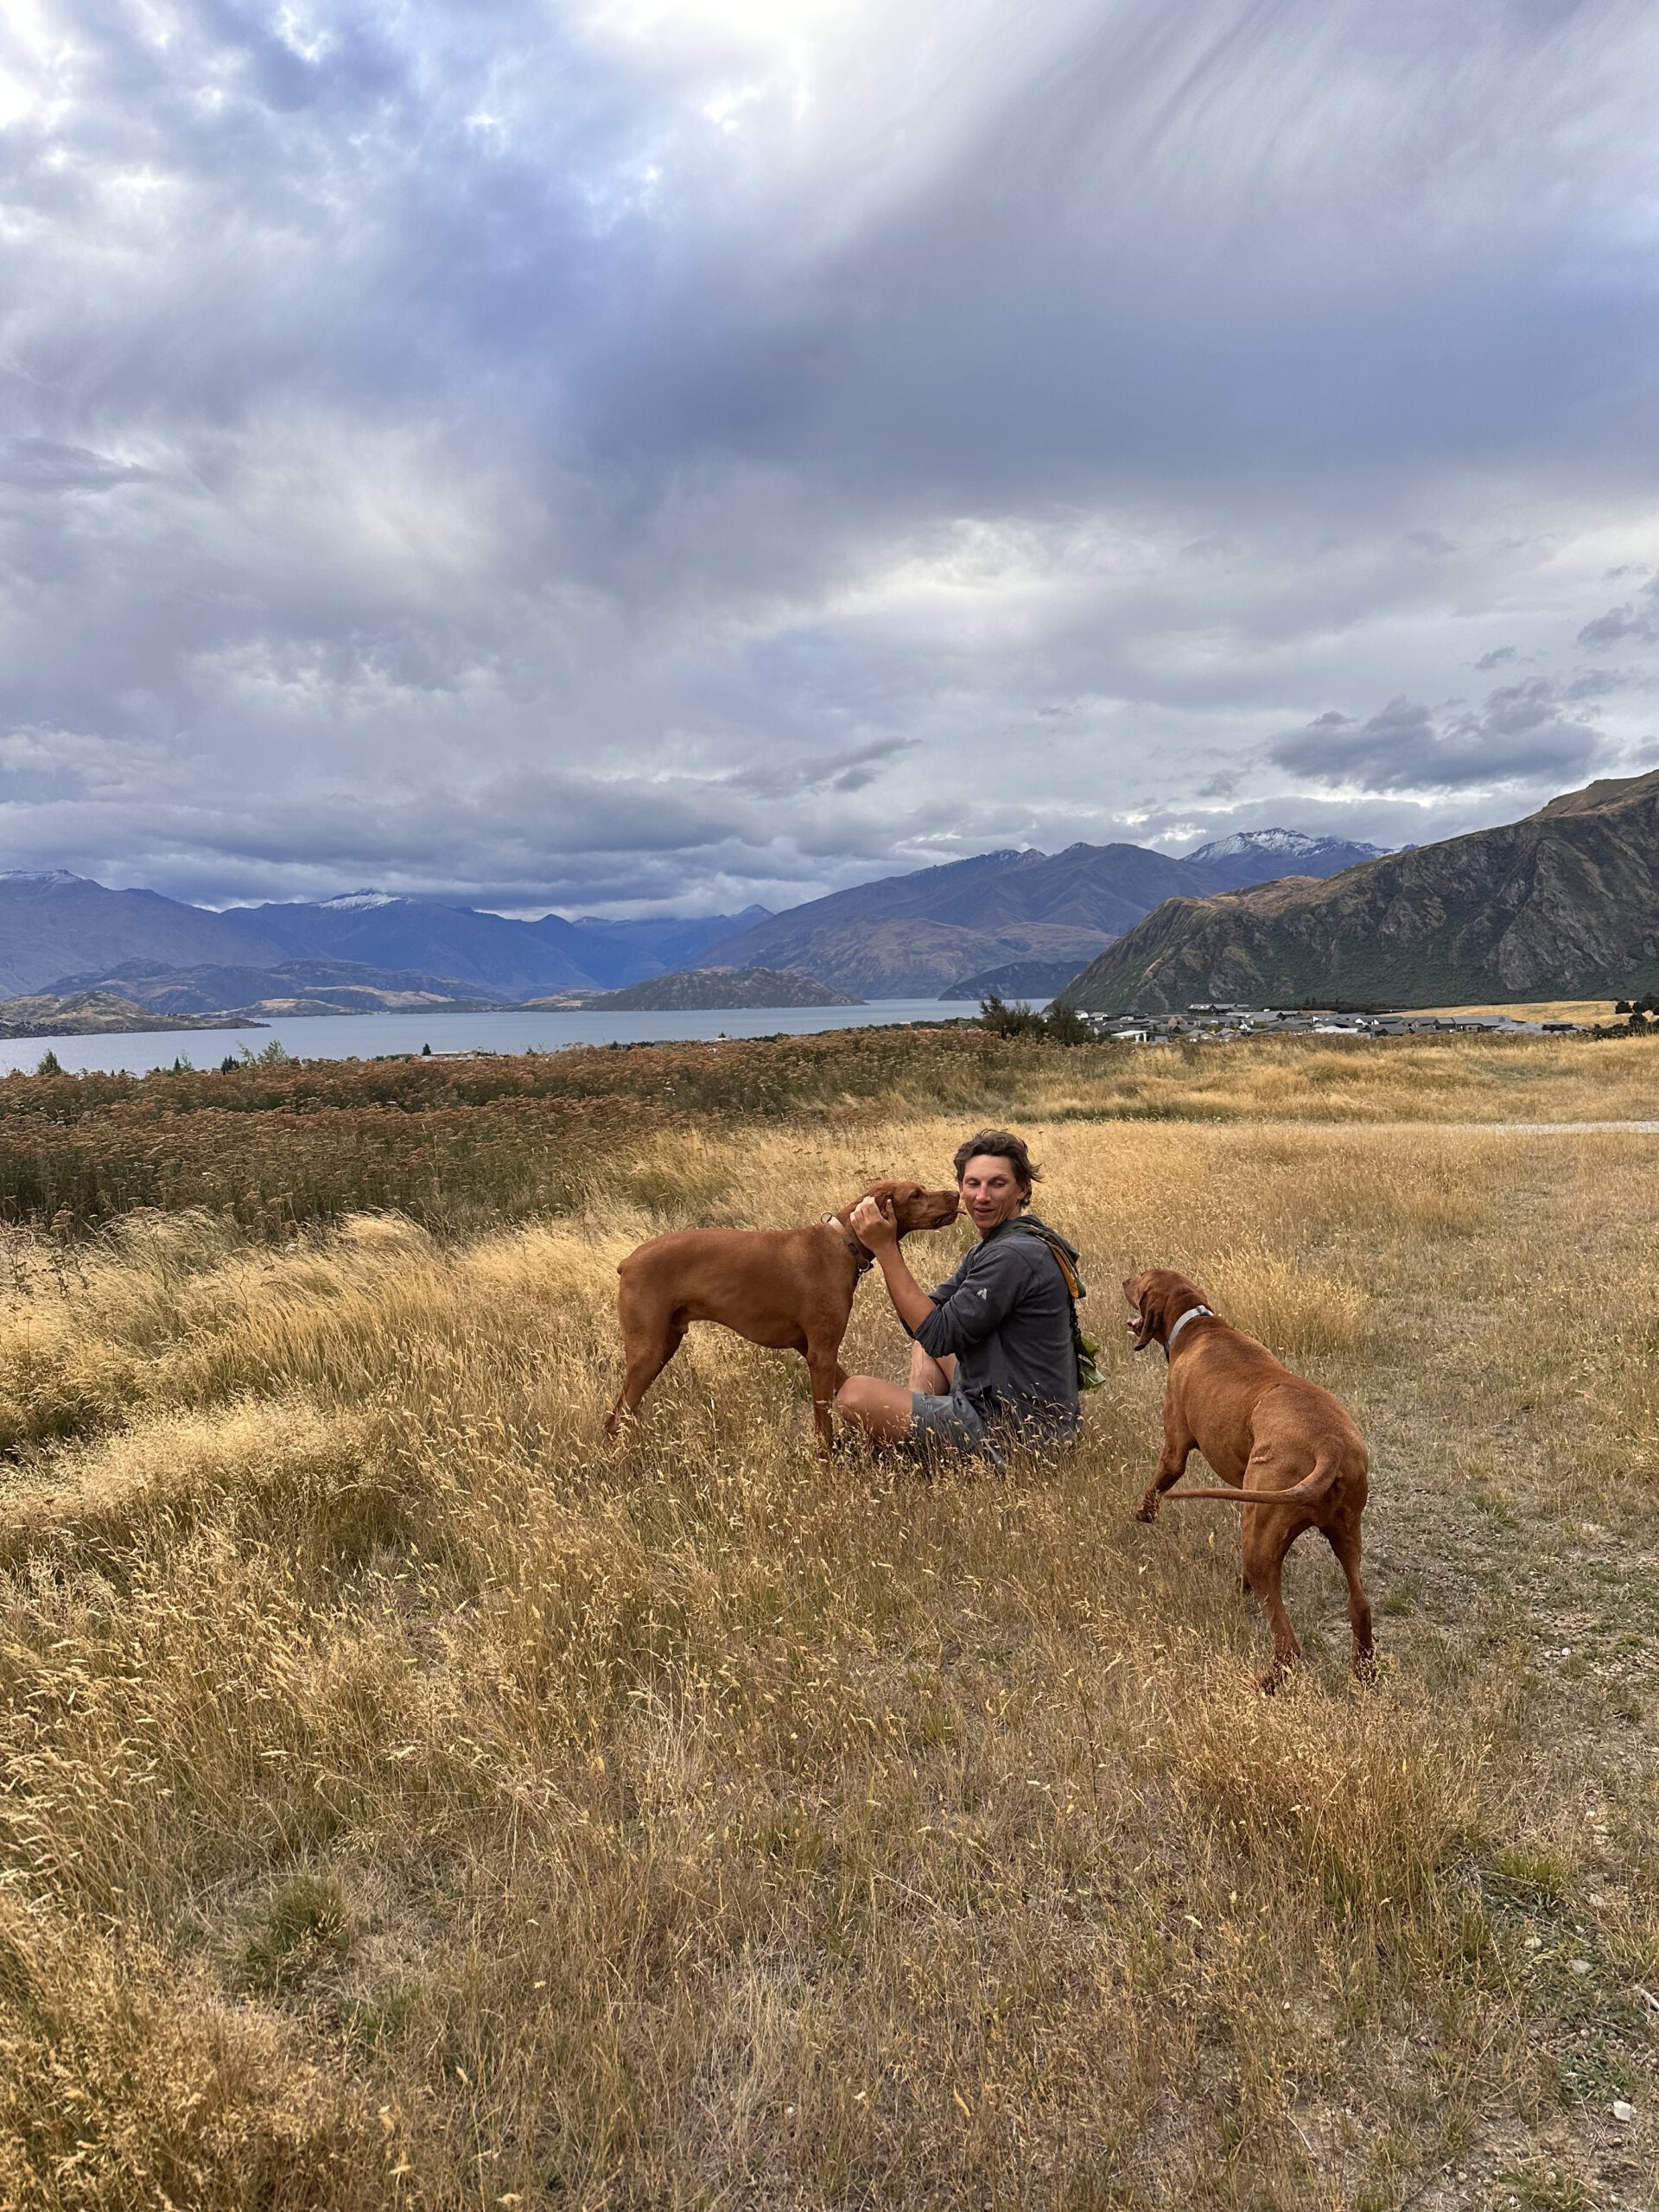 On a house sit in Wanaka on the South Island of New Zealand